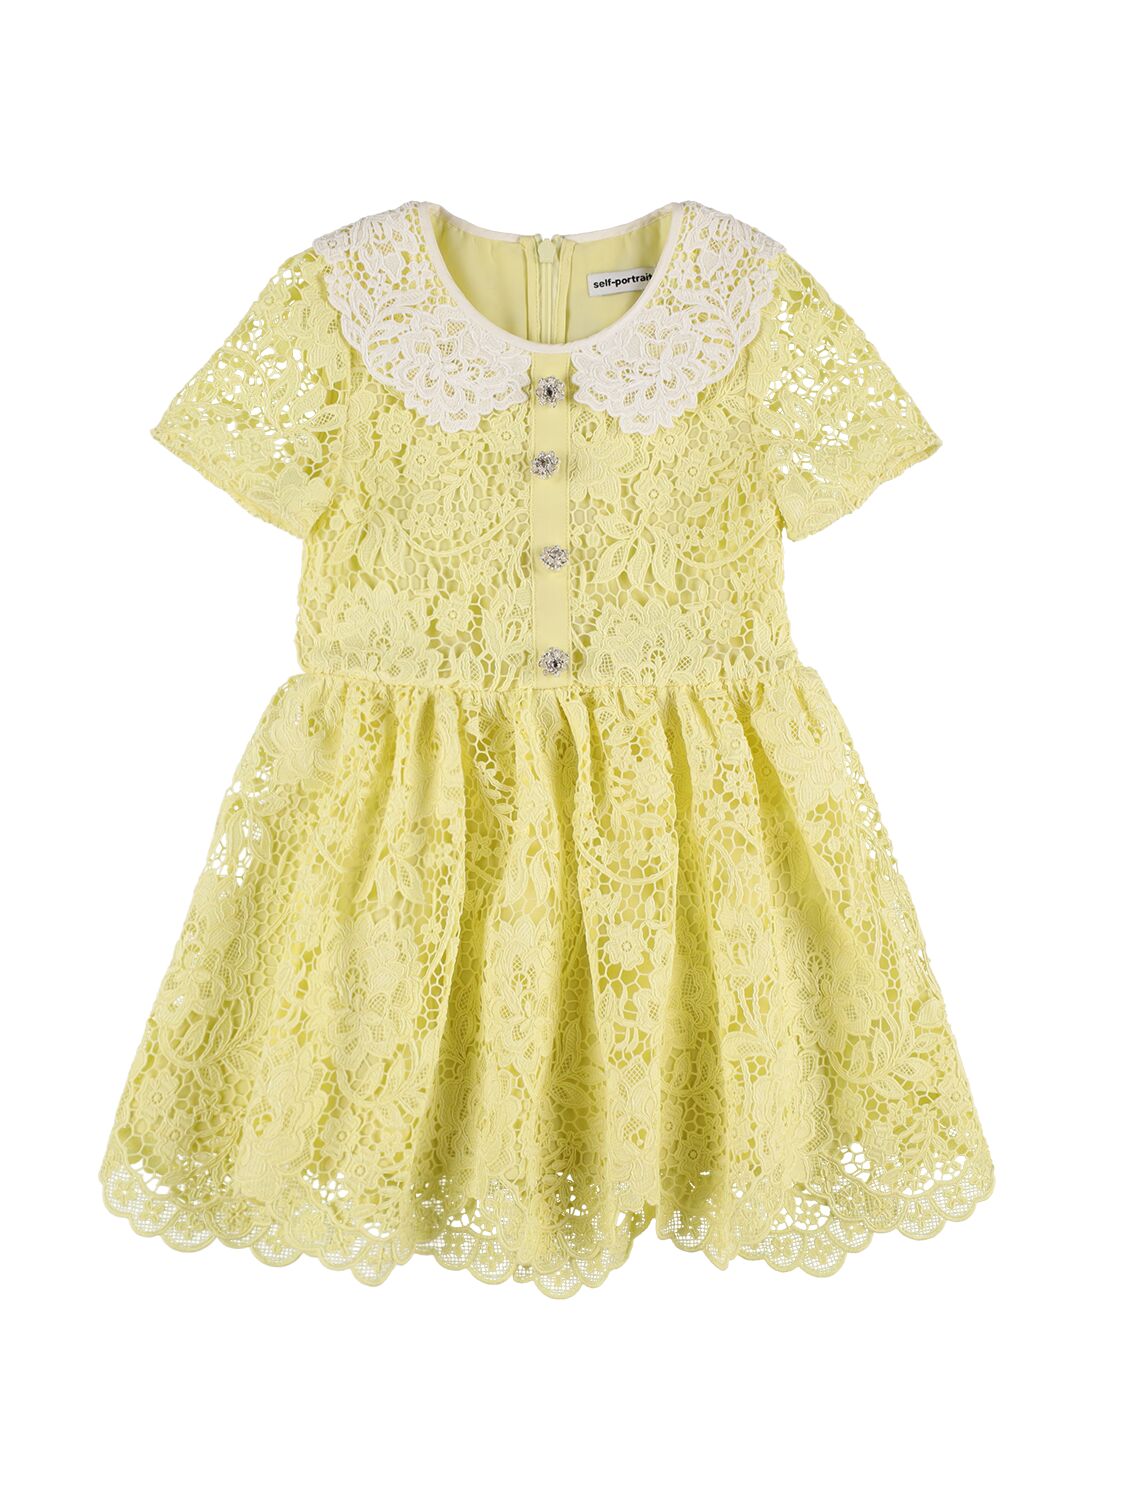 Self-portrait Kids' Floral Lace Dress W/ Embellished Buttons In Light Yellow